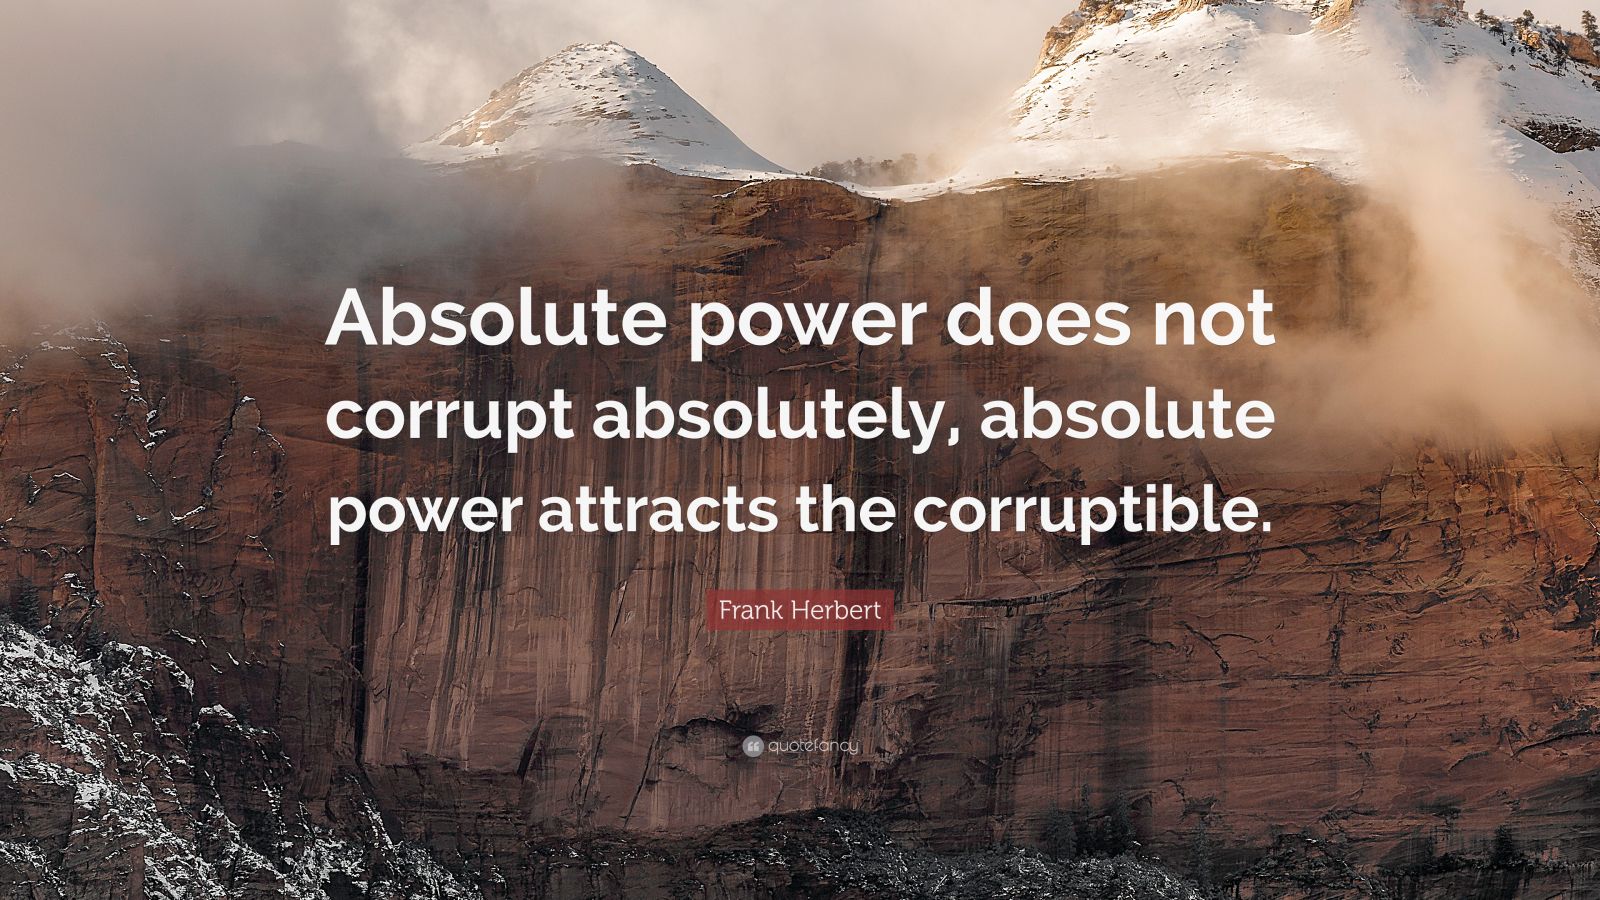 Does absolute power corrupt absolutely